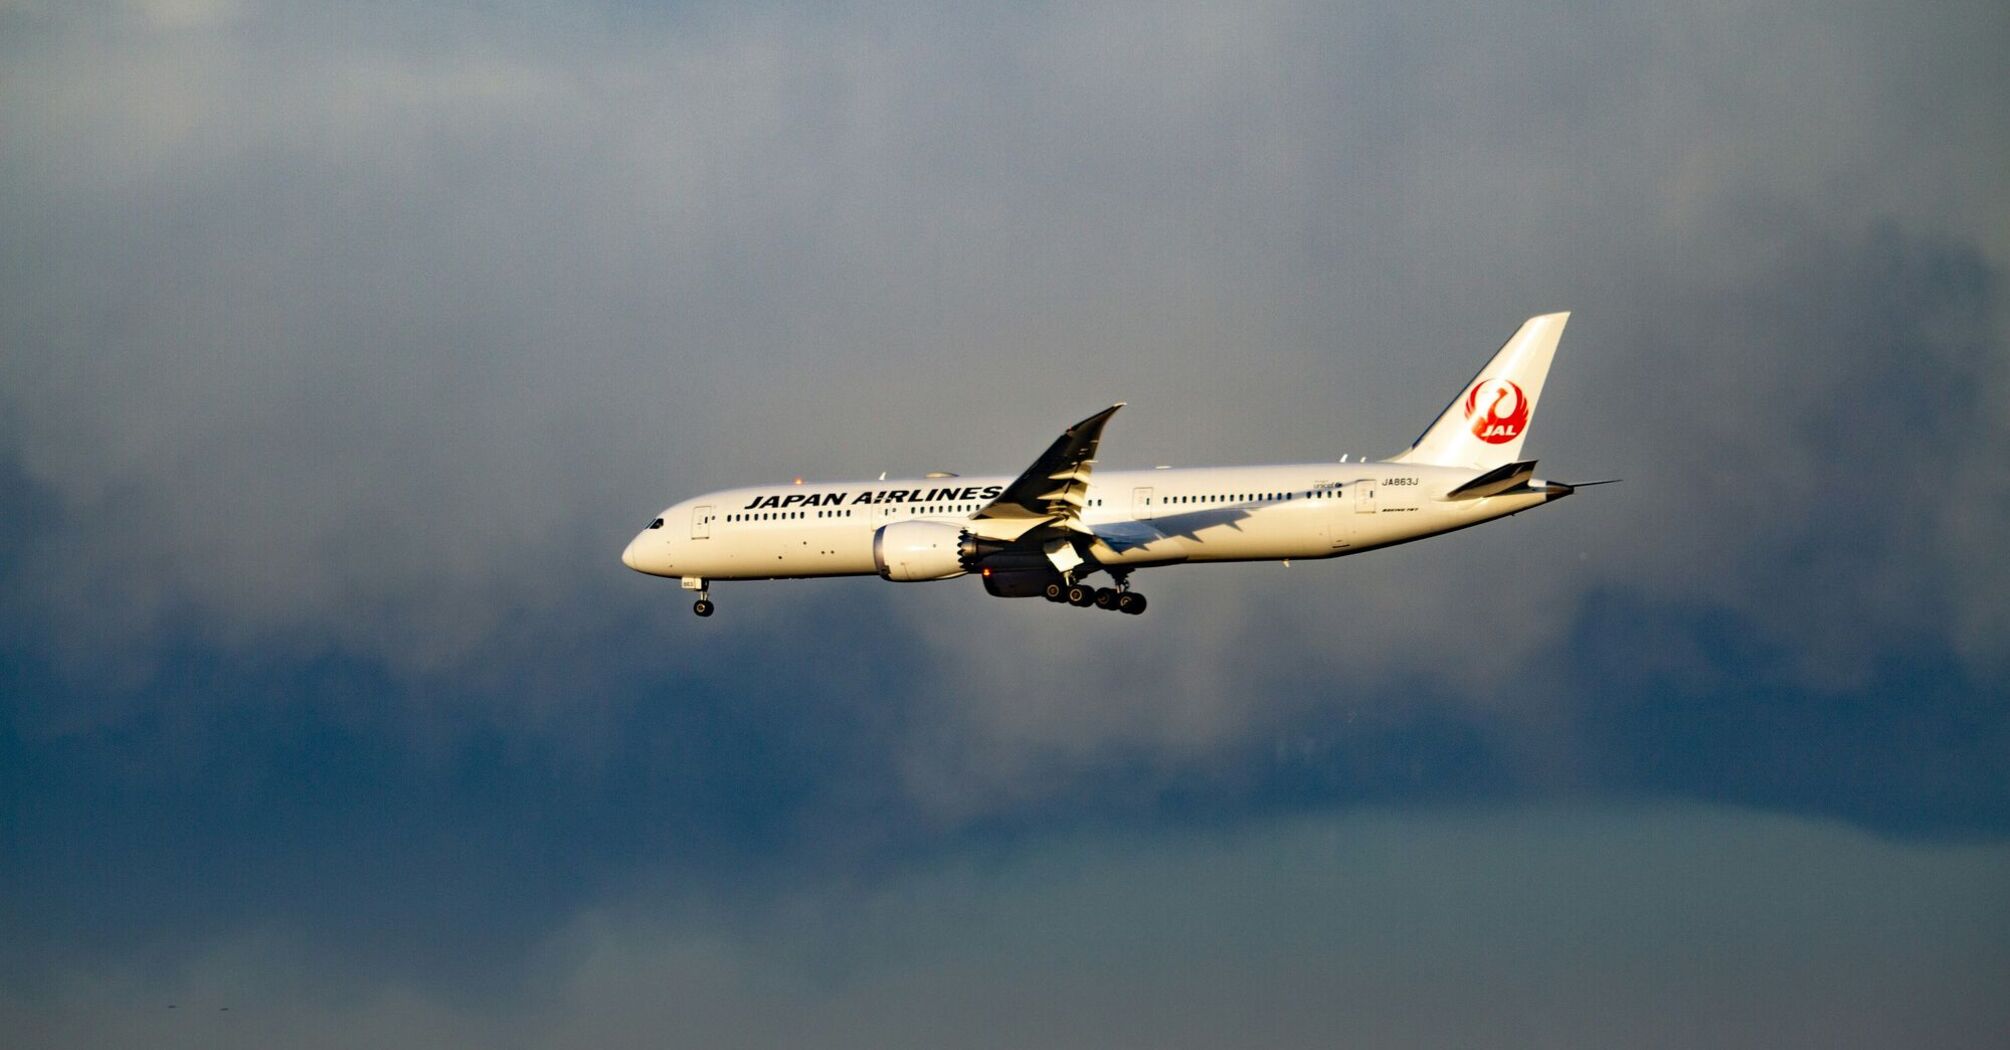 A Japan Airlines plane is landing